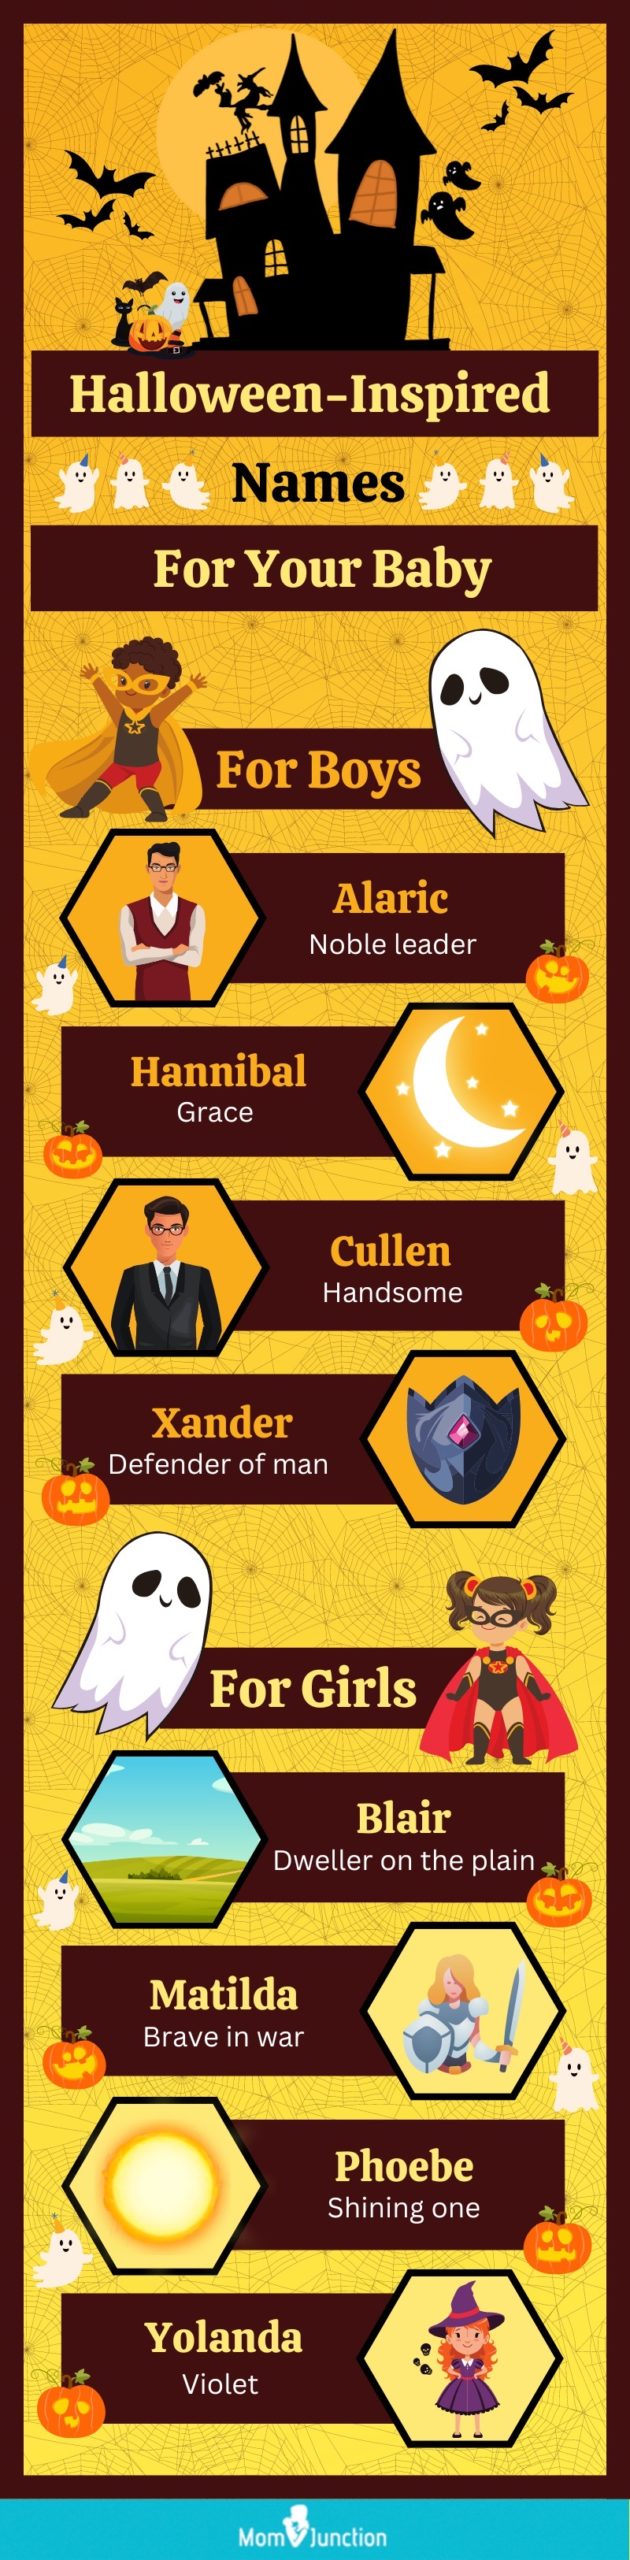 halloween inspired names for your baby (infographic)